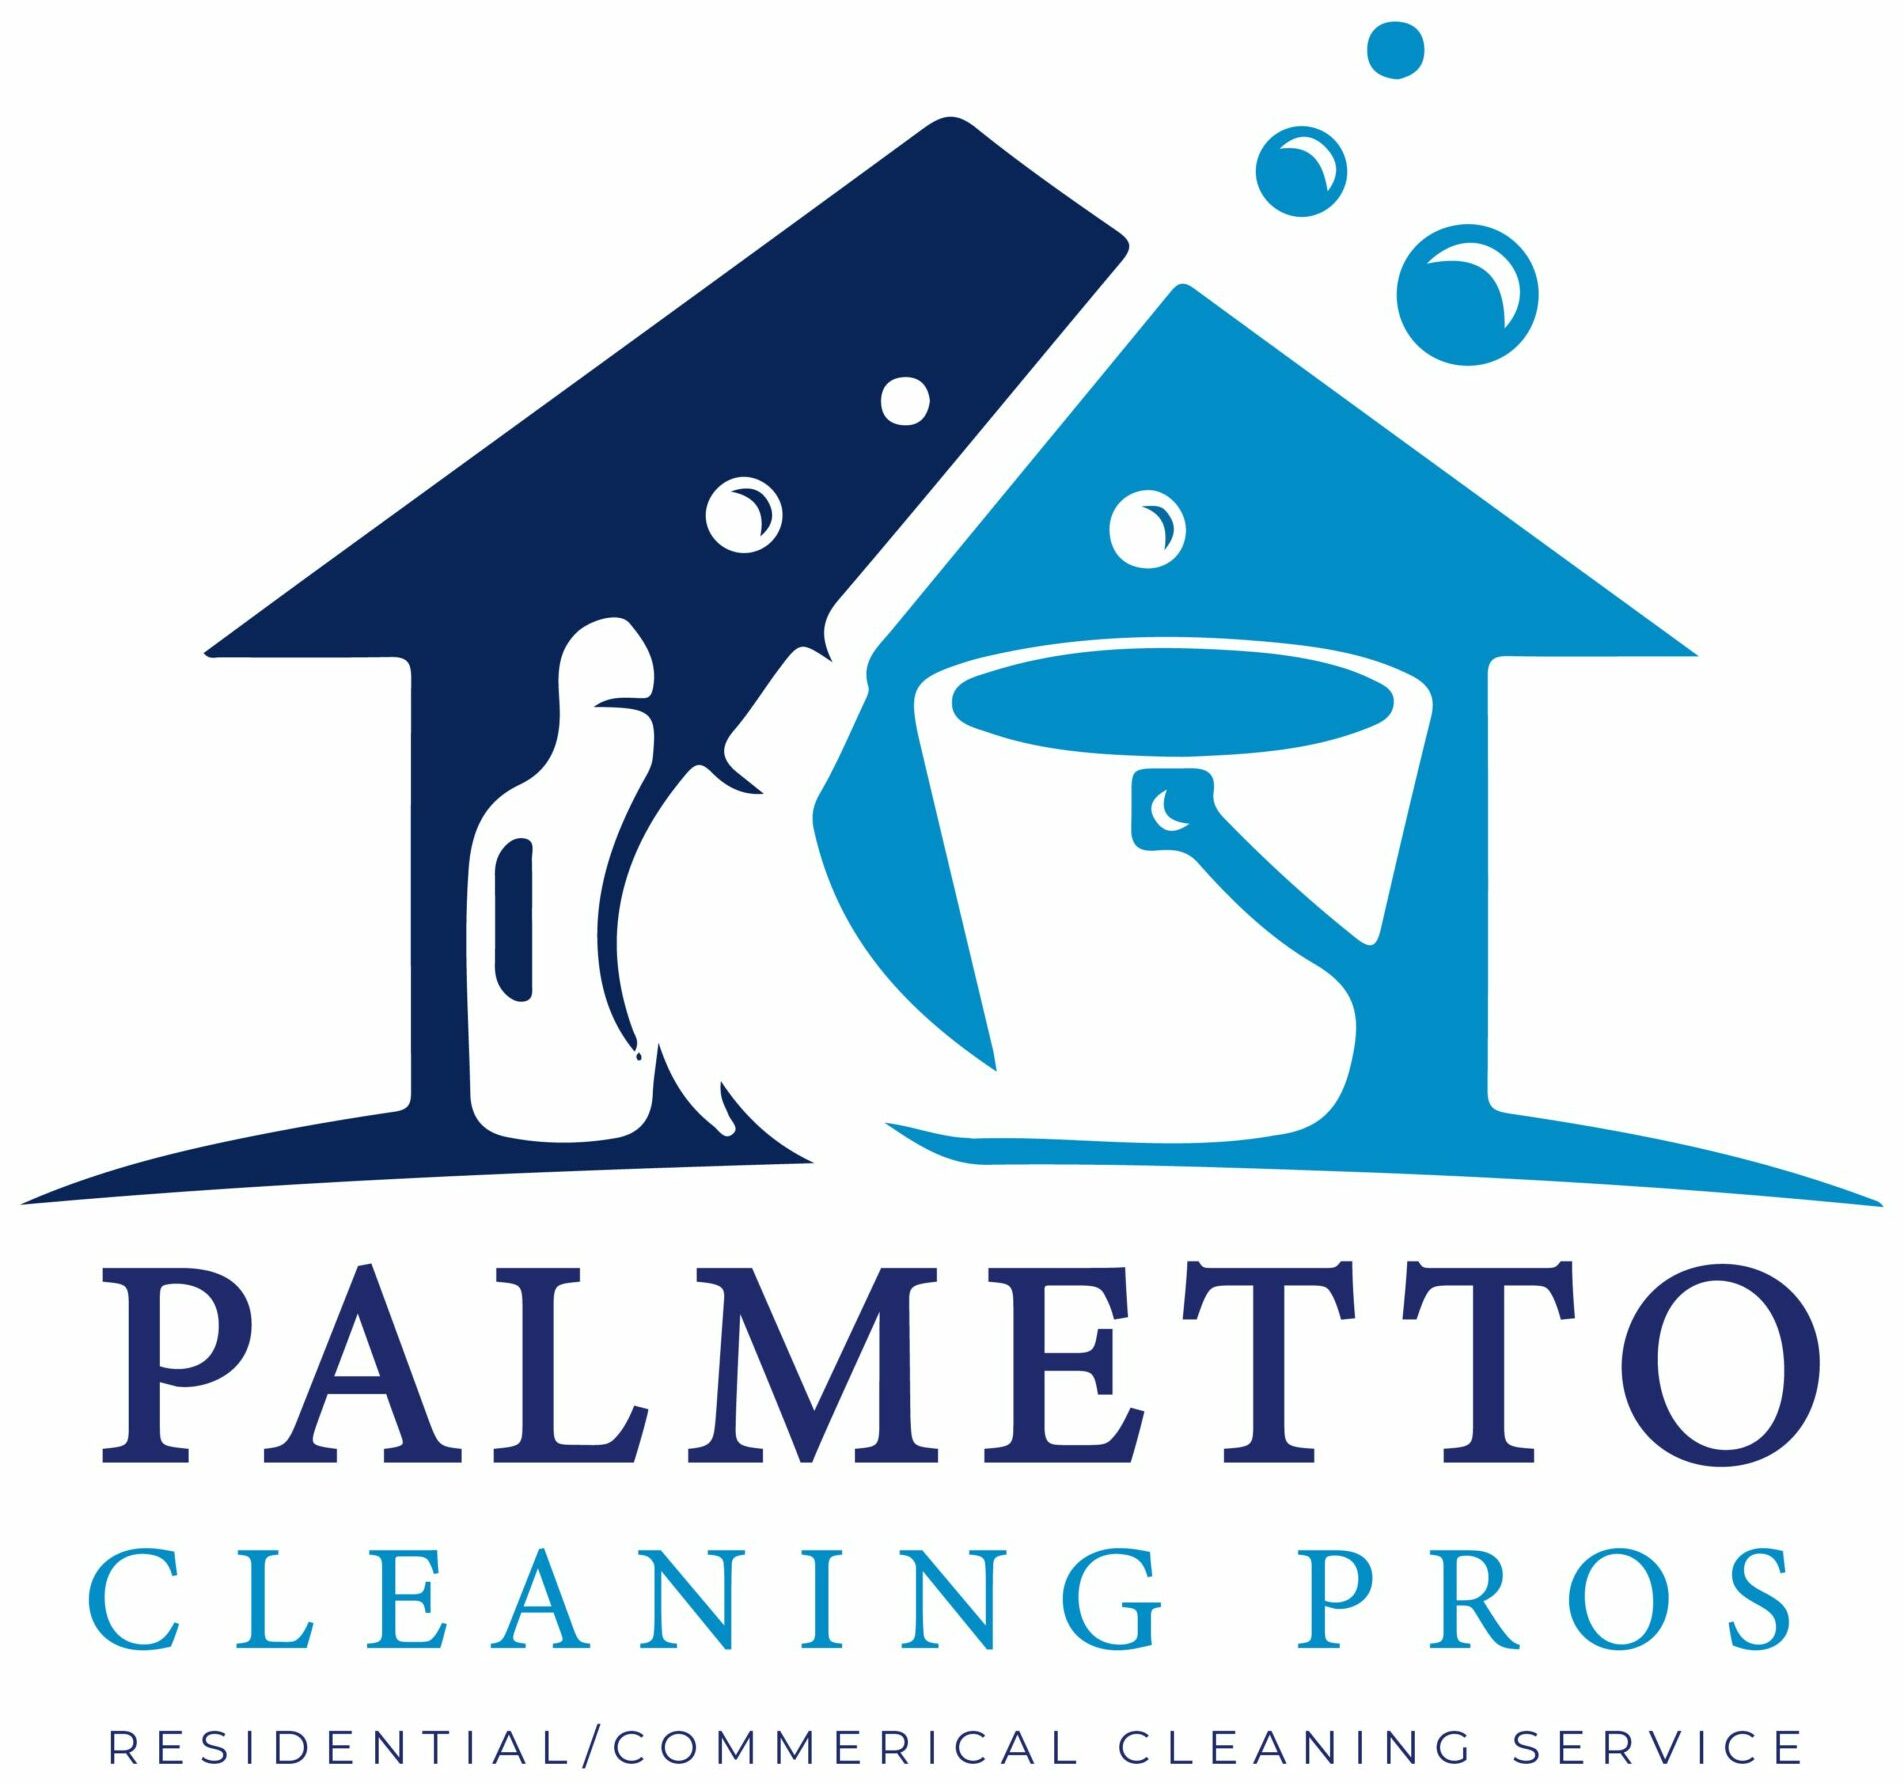 Palmetto Cleaning Pros